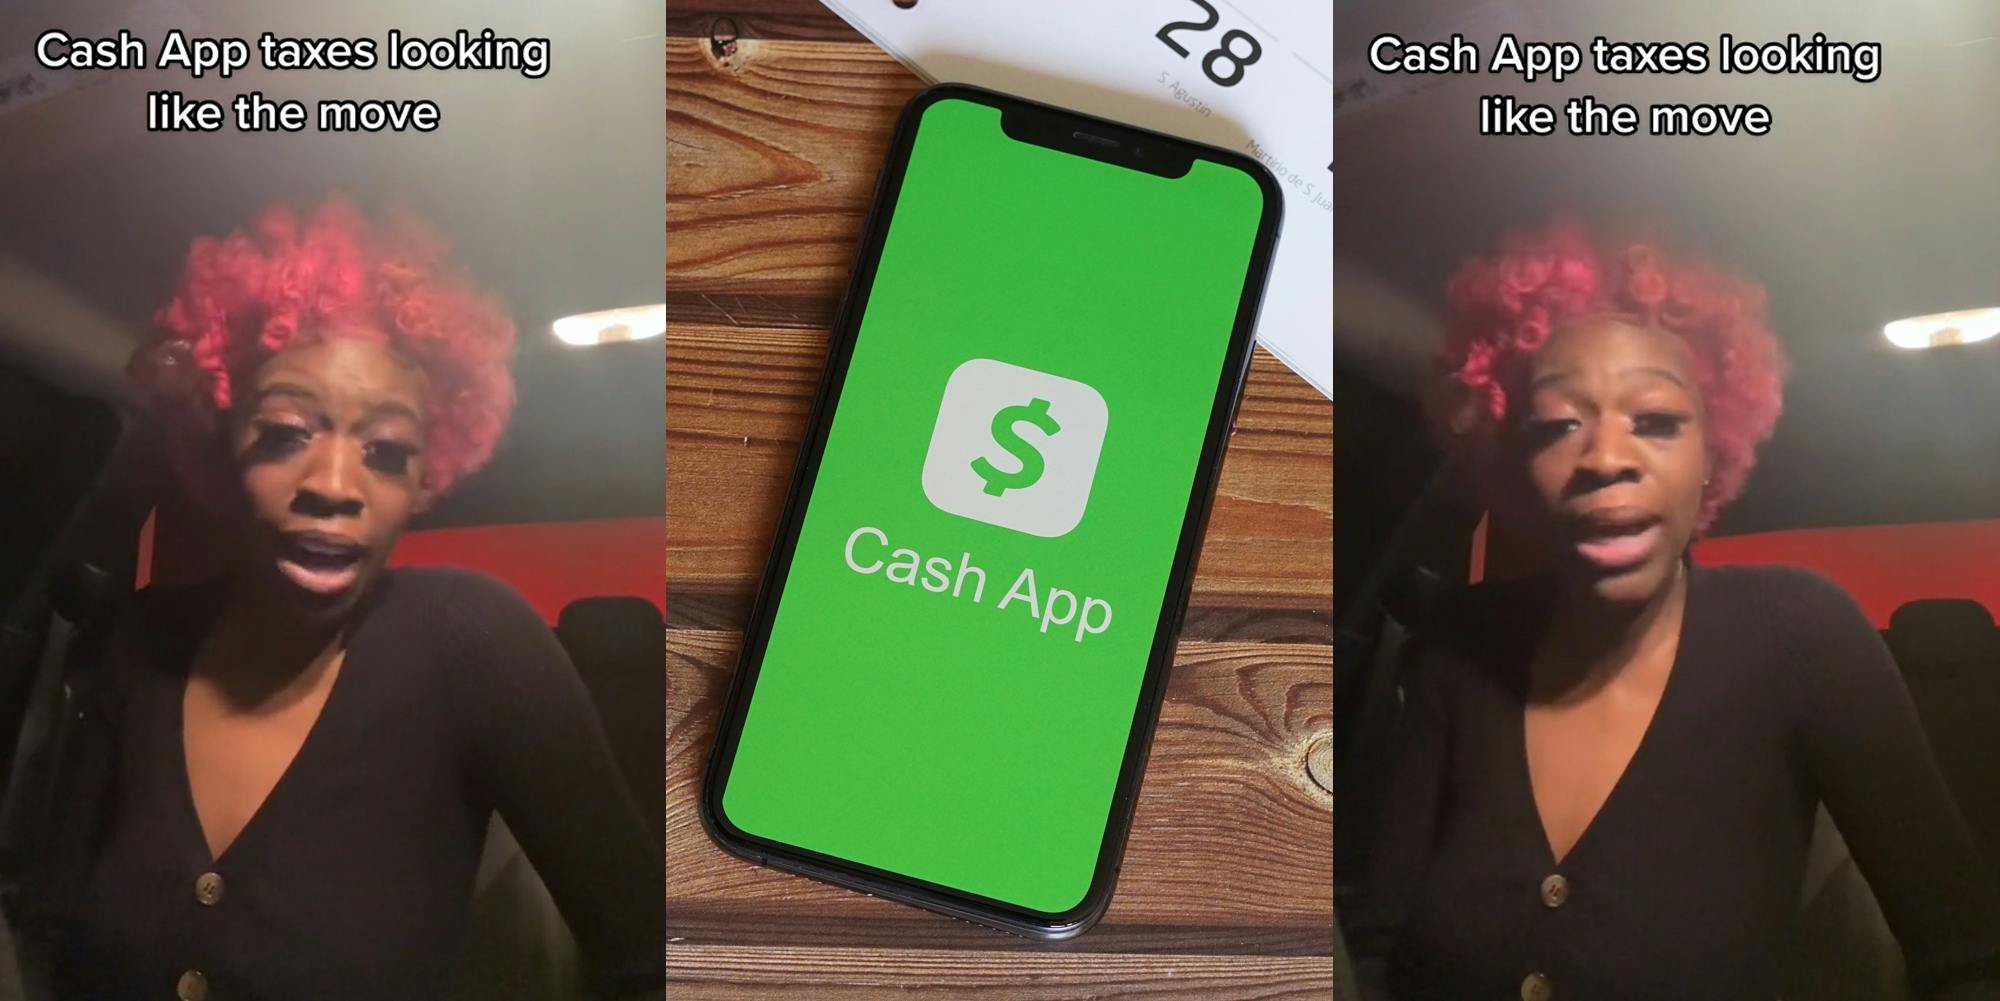 woman speaking in car with caption "Cash App taxes looking like the move" (l) Cash App on phone on wooden surface (c) woman speaking in car with caption "Cash App taxes looking like the move" (r)